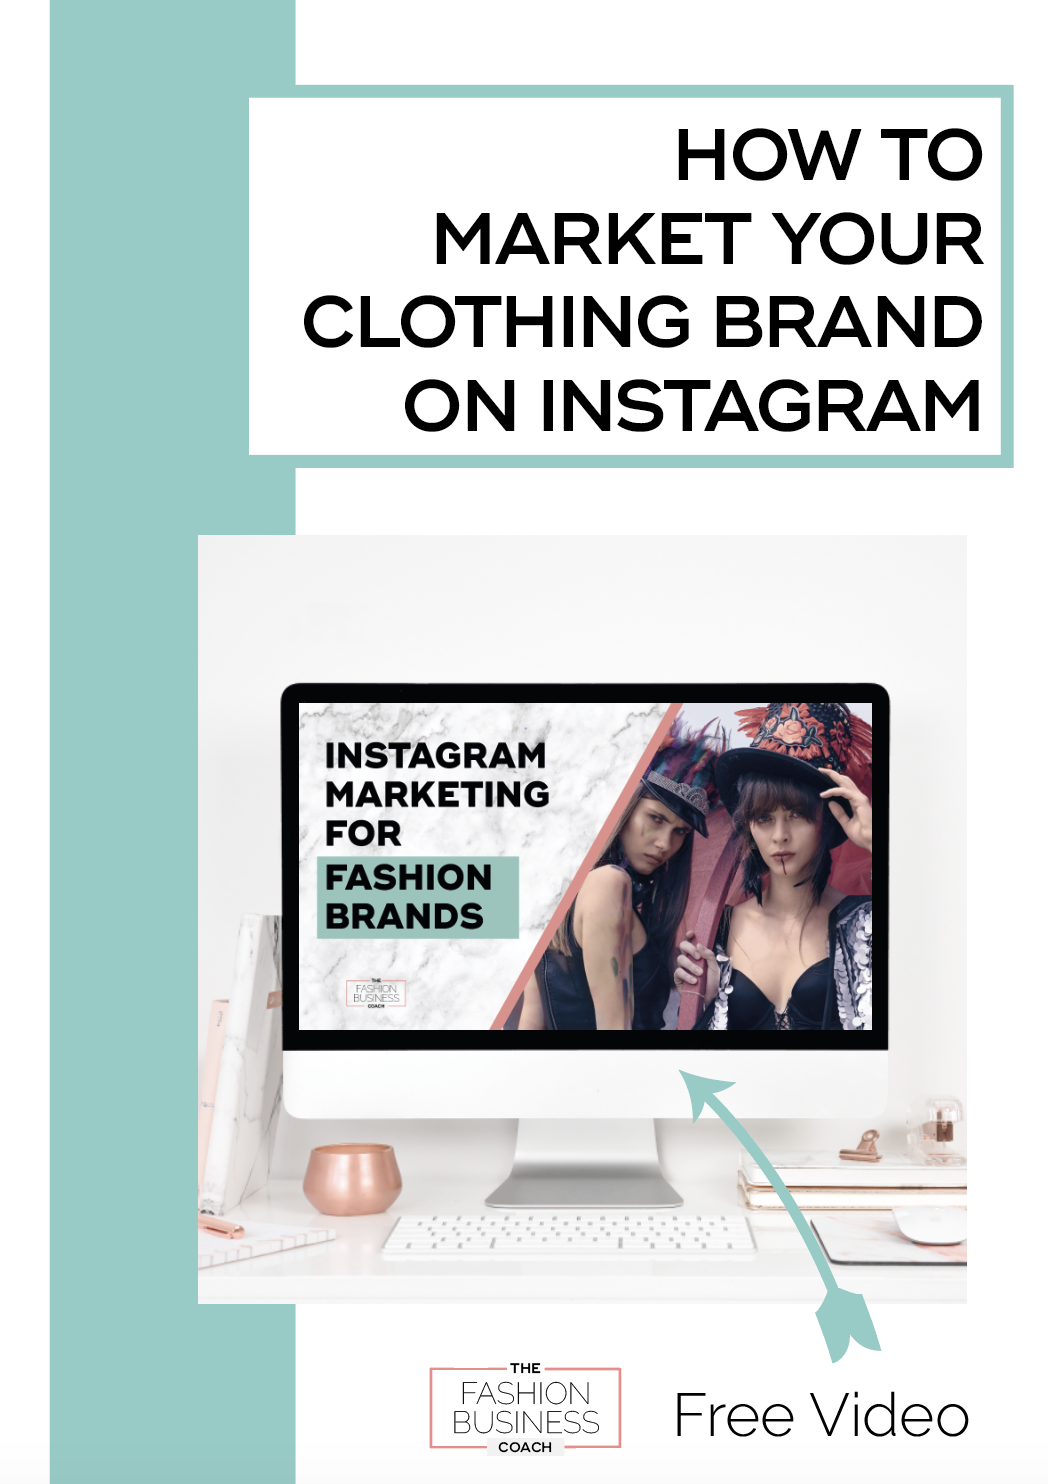 How to Market your Clothing Brand on Instagram 4.png